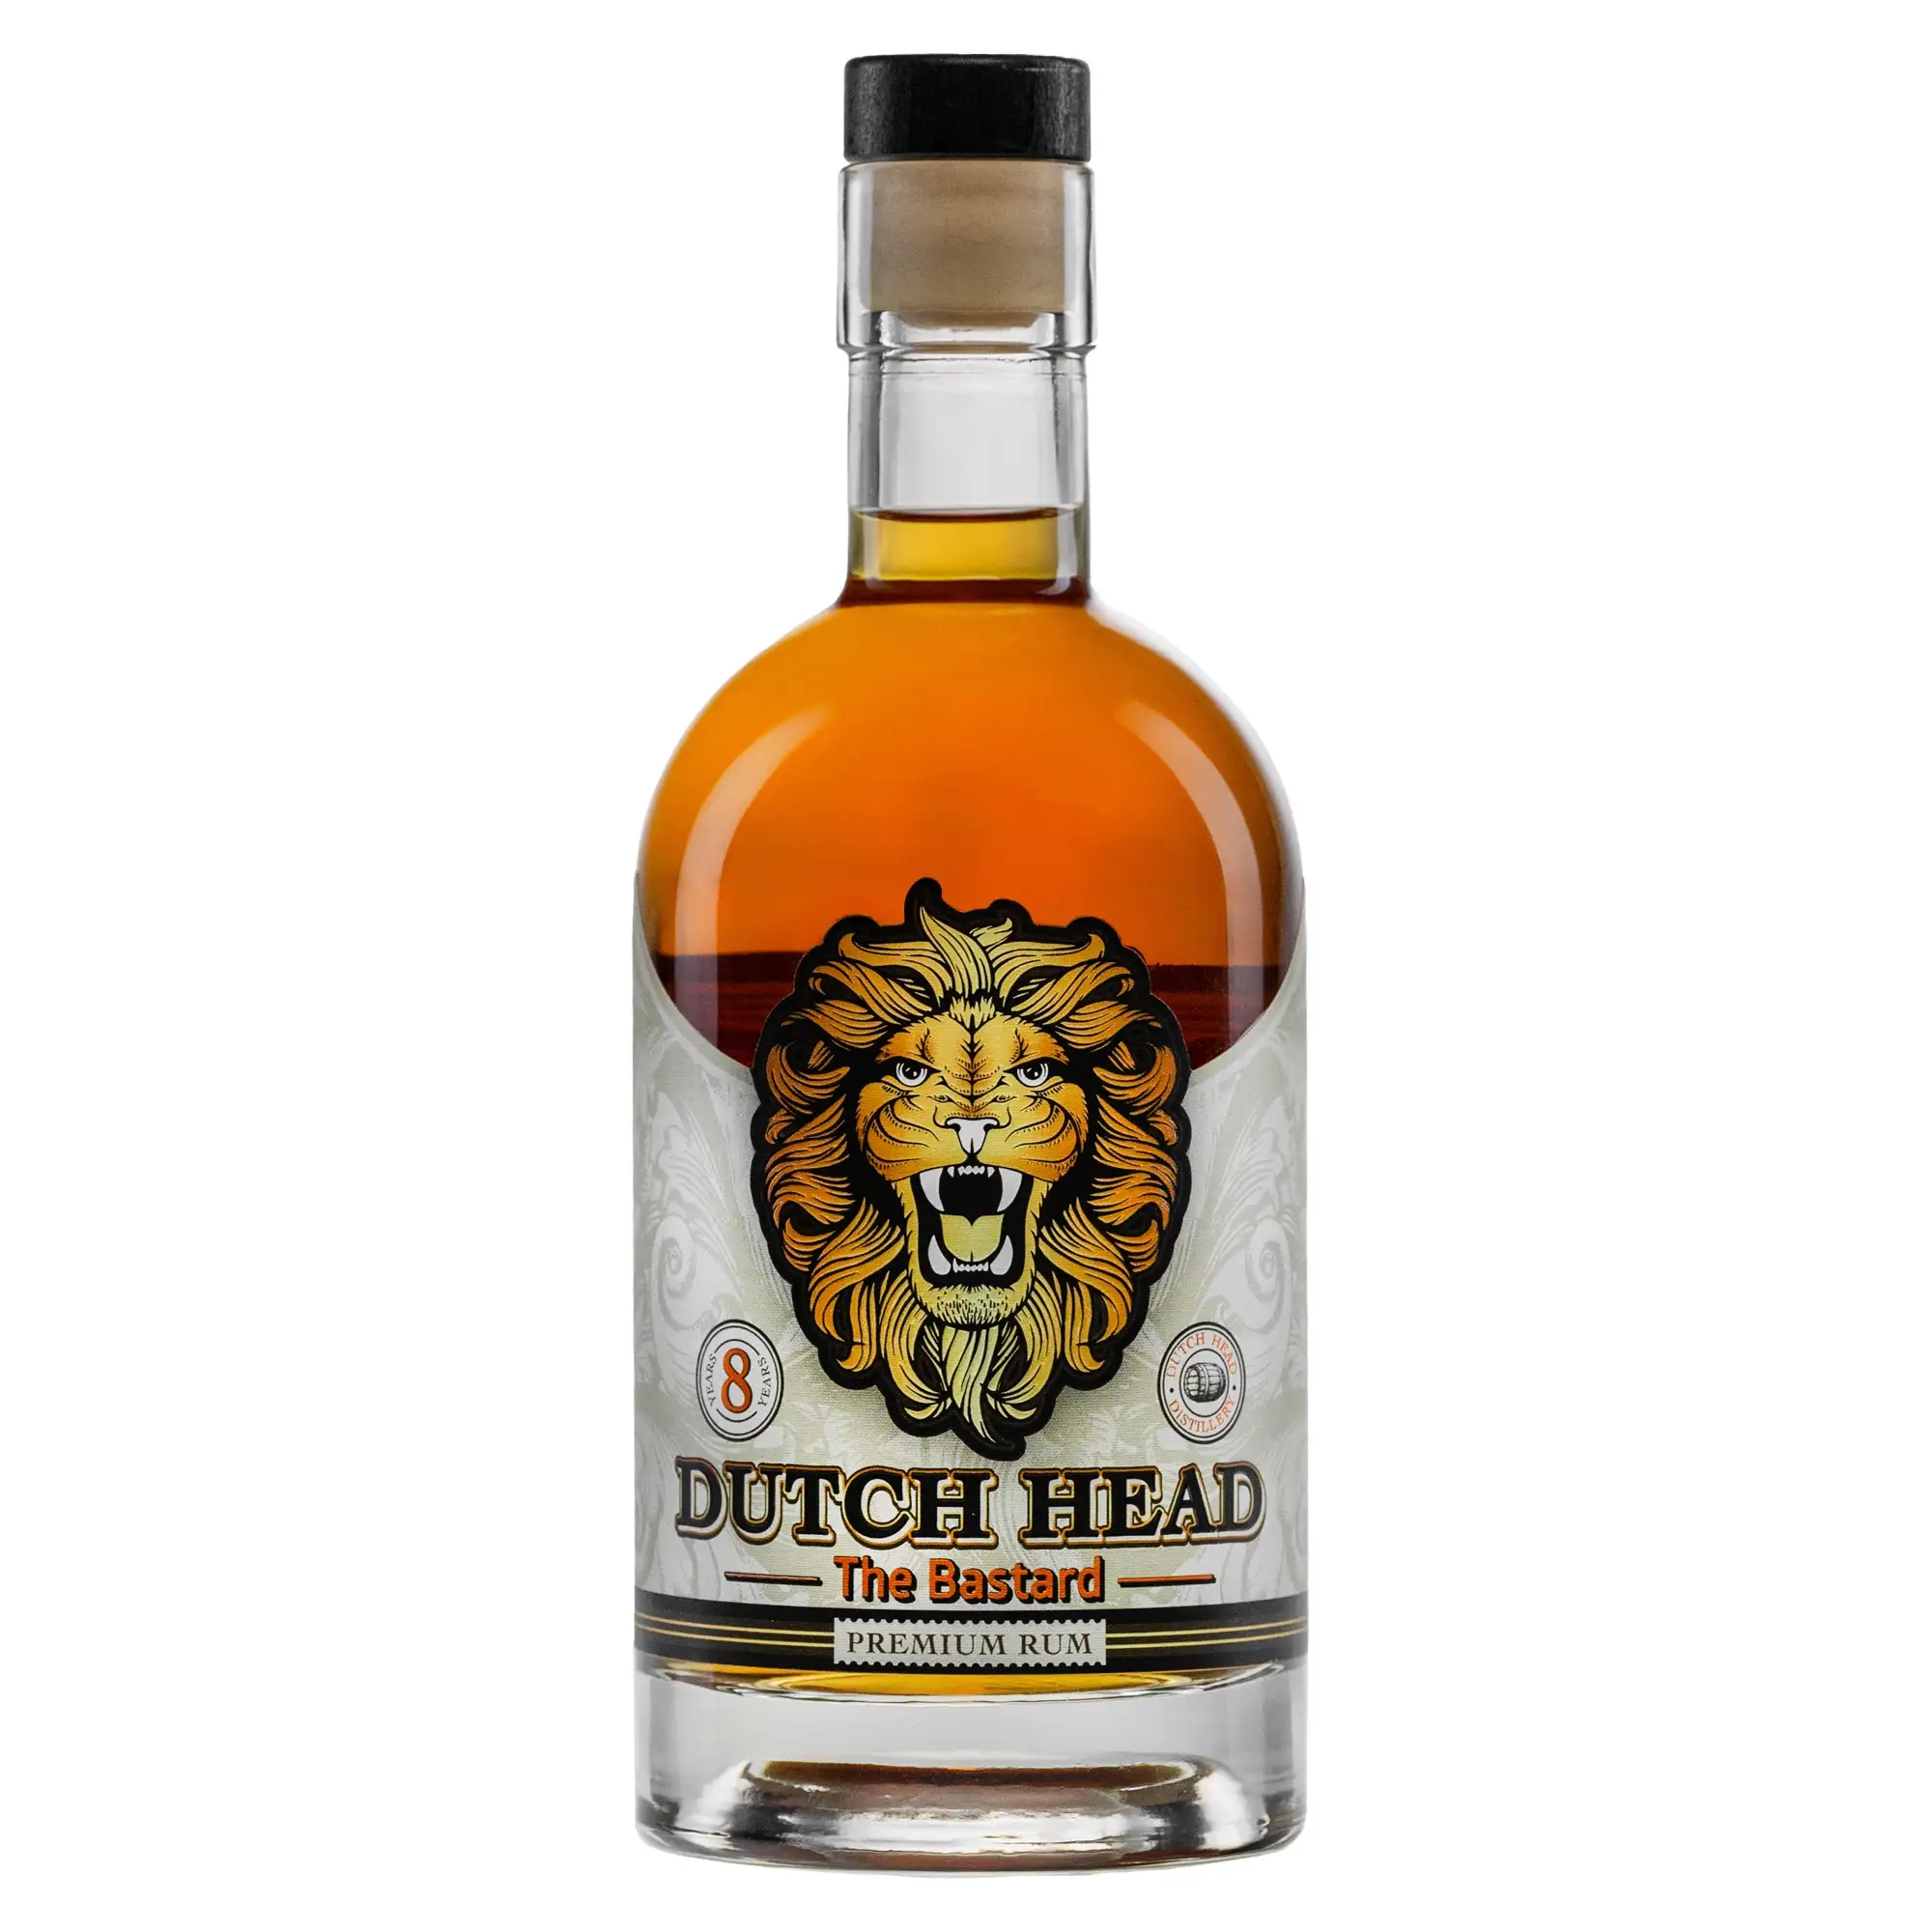 Image of the front of the bottle of the rum Dutch Head The Bastard Edition